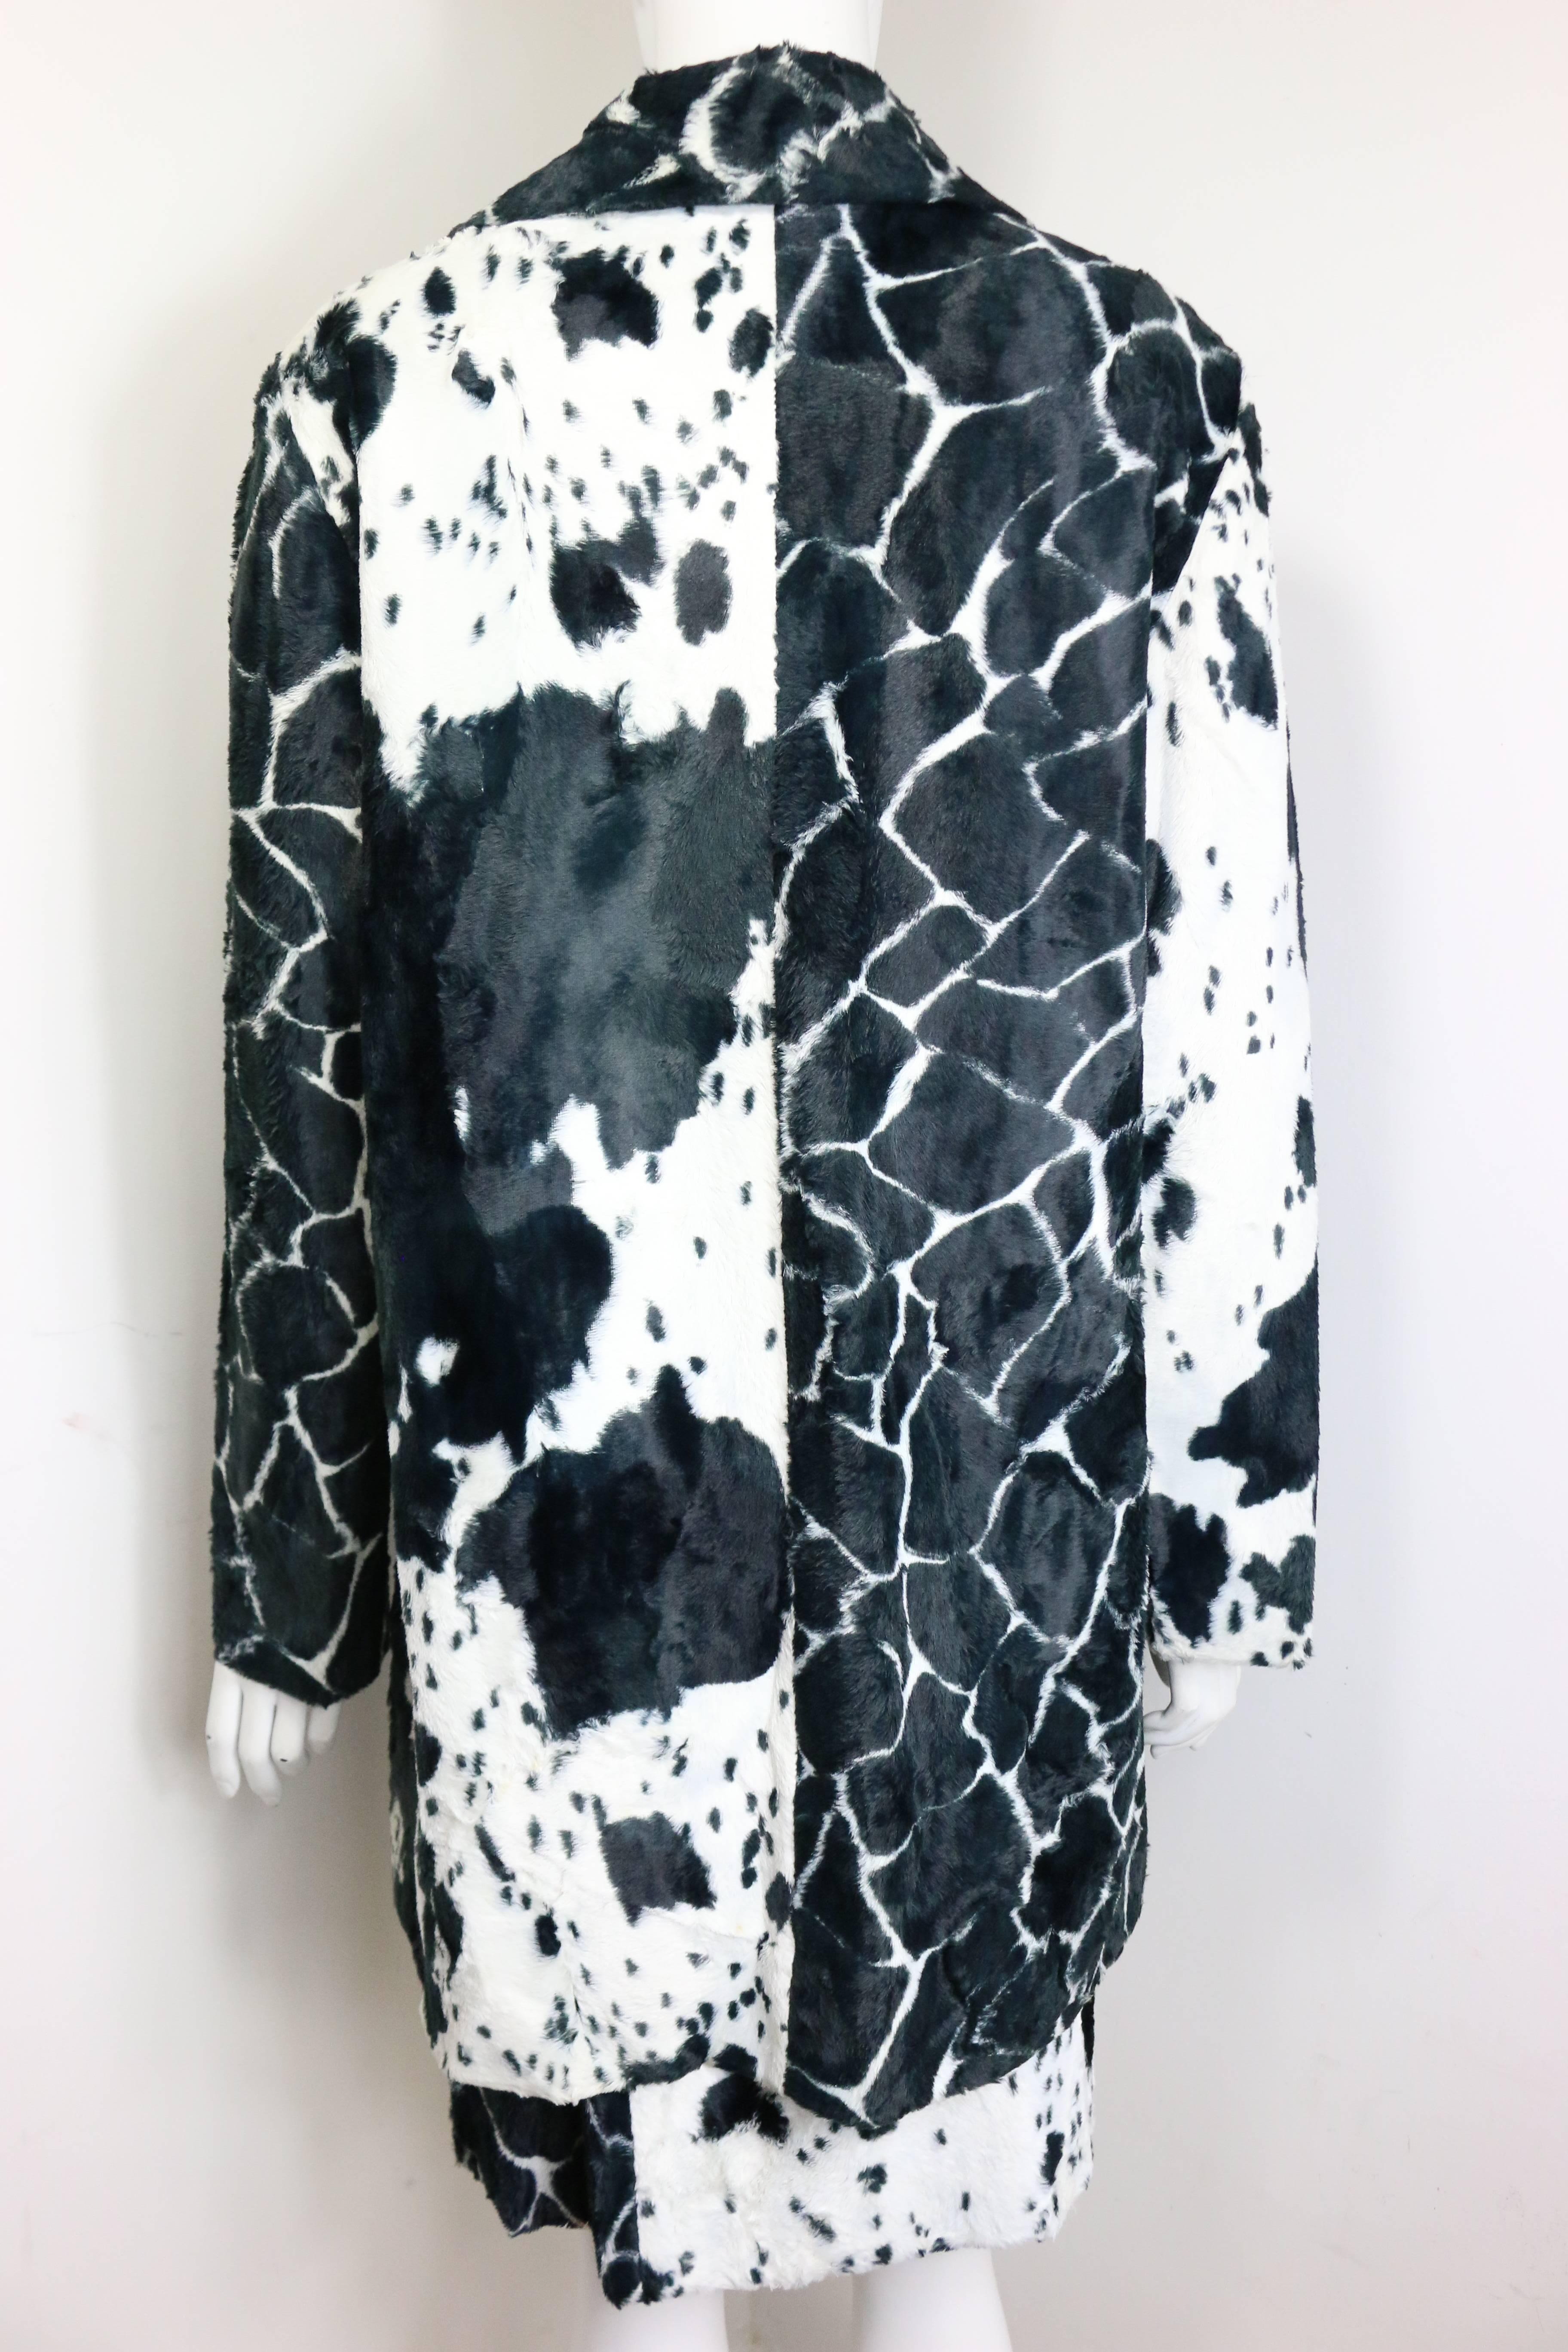 - Vintage 90s Kenzo black and white cow print faux fur jacket and skirt ensemble. Featuring four buttons fastening and two pockets. Animal print will never go out of style! 

- Made in France. 

- Size 38. 

- 67% Cotton, 33% Rayon. Lining: